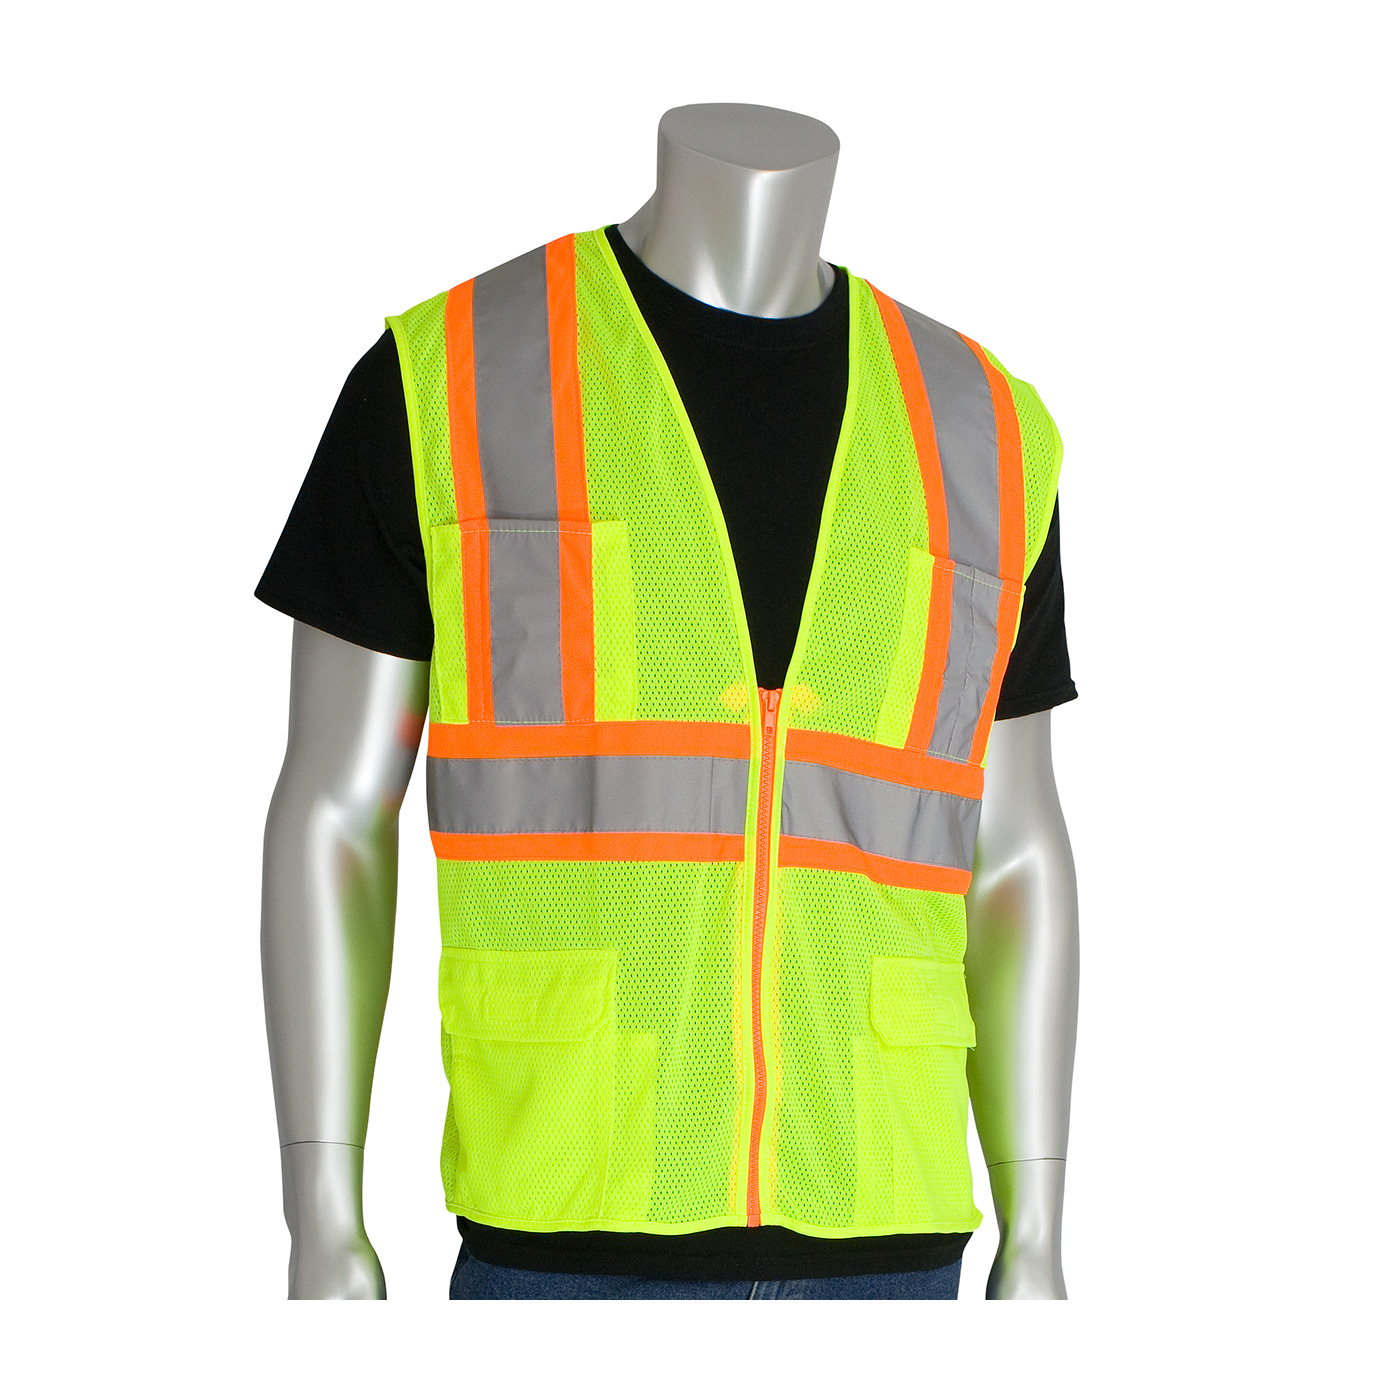 PIP 302-MAPMLY-3X ANSI Type R Class 2 Yellow Two-Tone Eleven Pocket Premium Mesh Surveyors Vest - 3X-Large PID-302 MAPMLY 3X